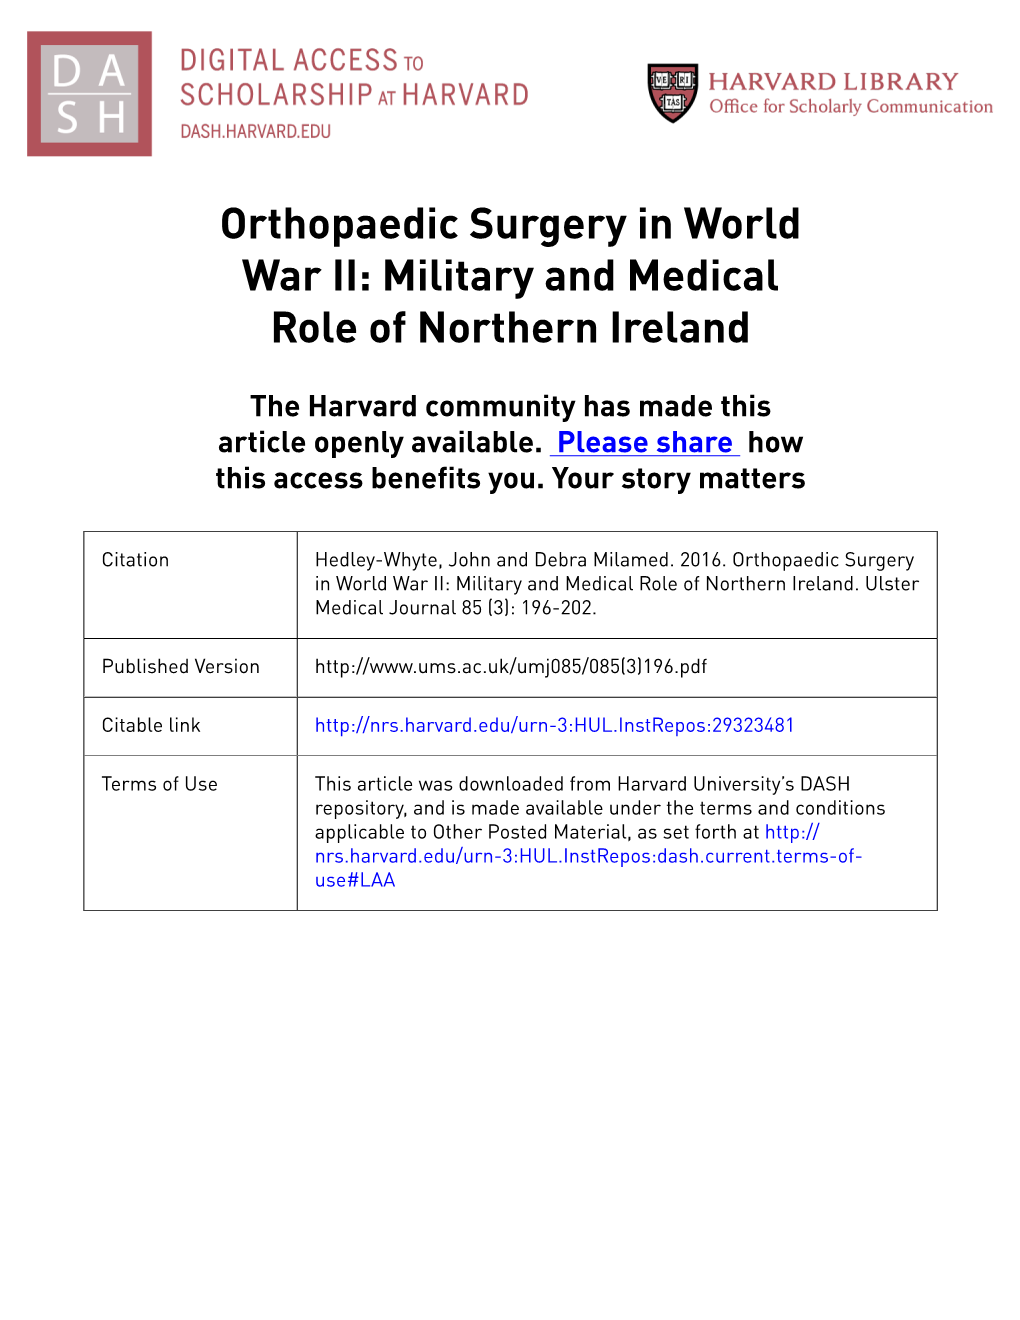 Orthopaedic Surgery in World War II: Military and Medical Role of Northern Ireland